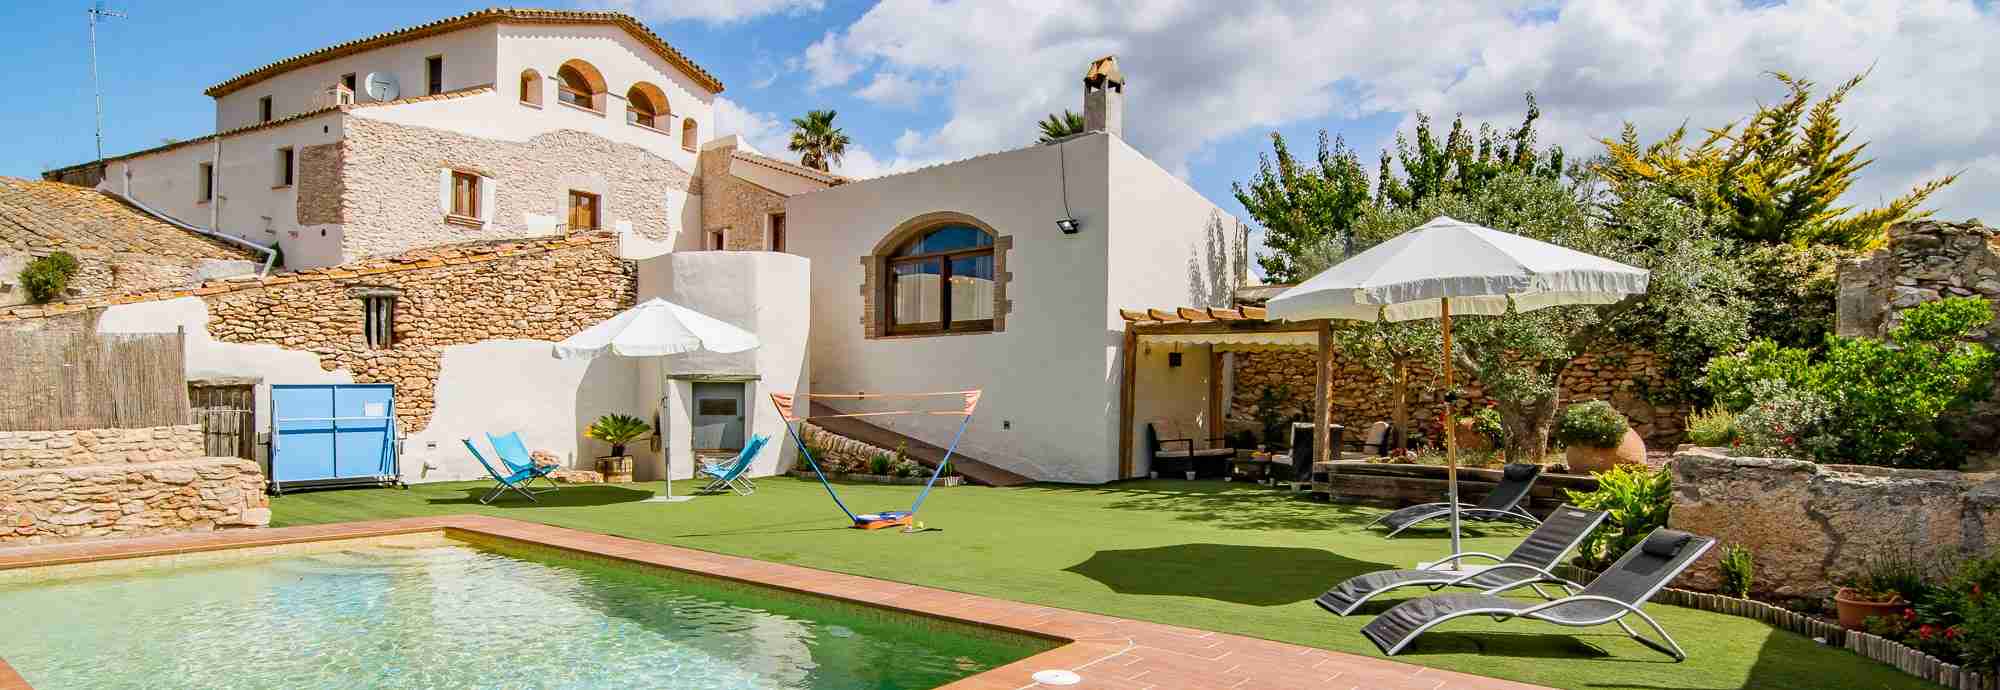 Historical certified eco-farmhouse in the vineyards of Costa Dorada